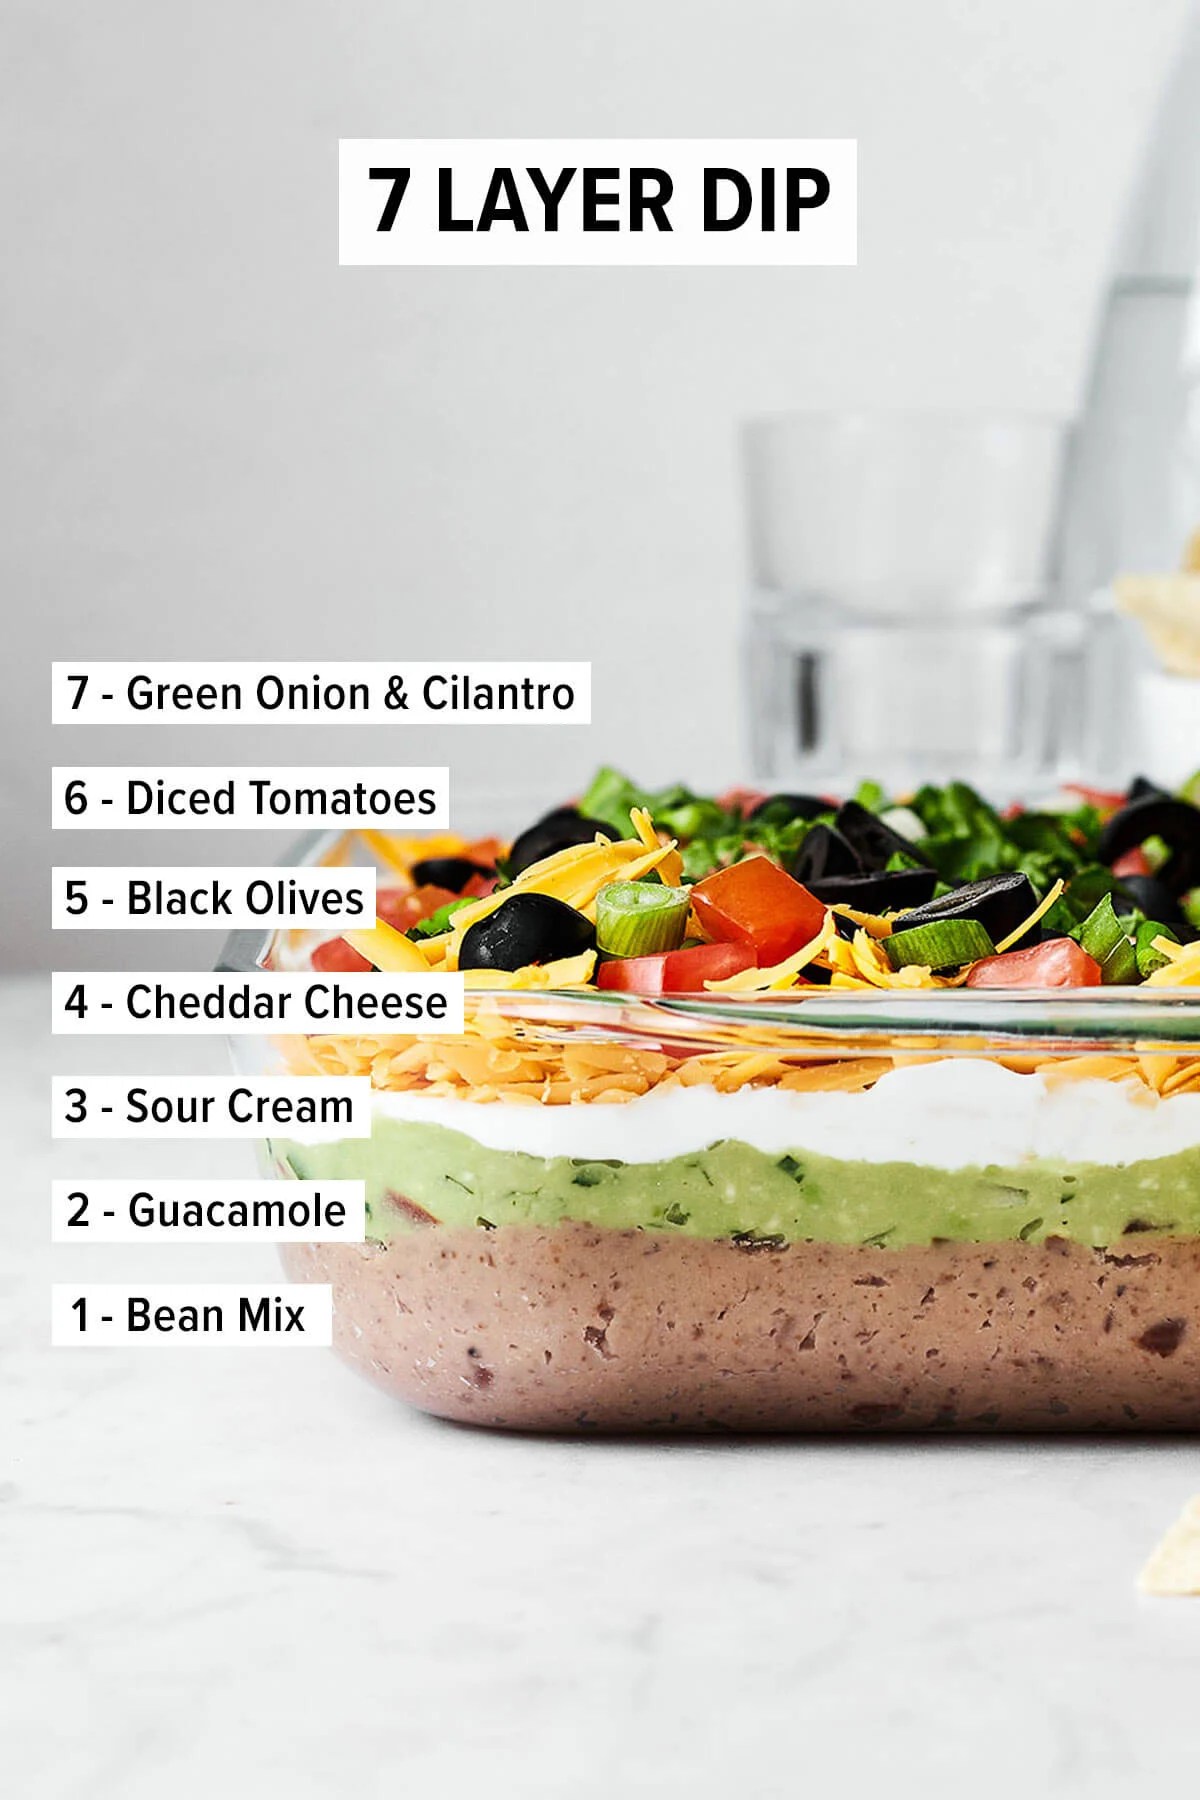 Ingredients labeled for a 7 layer dip